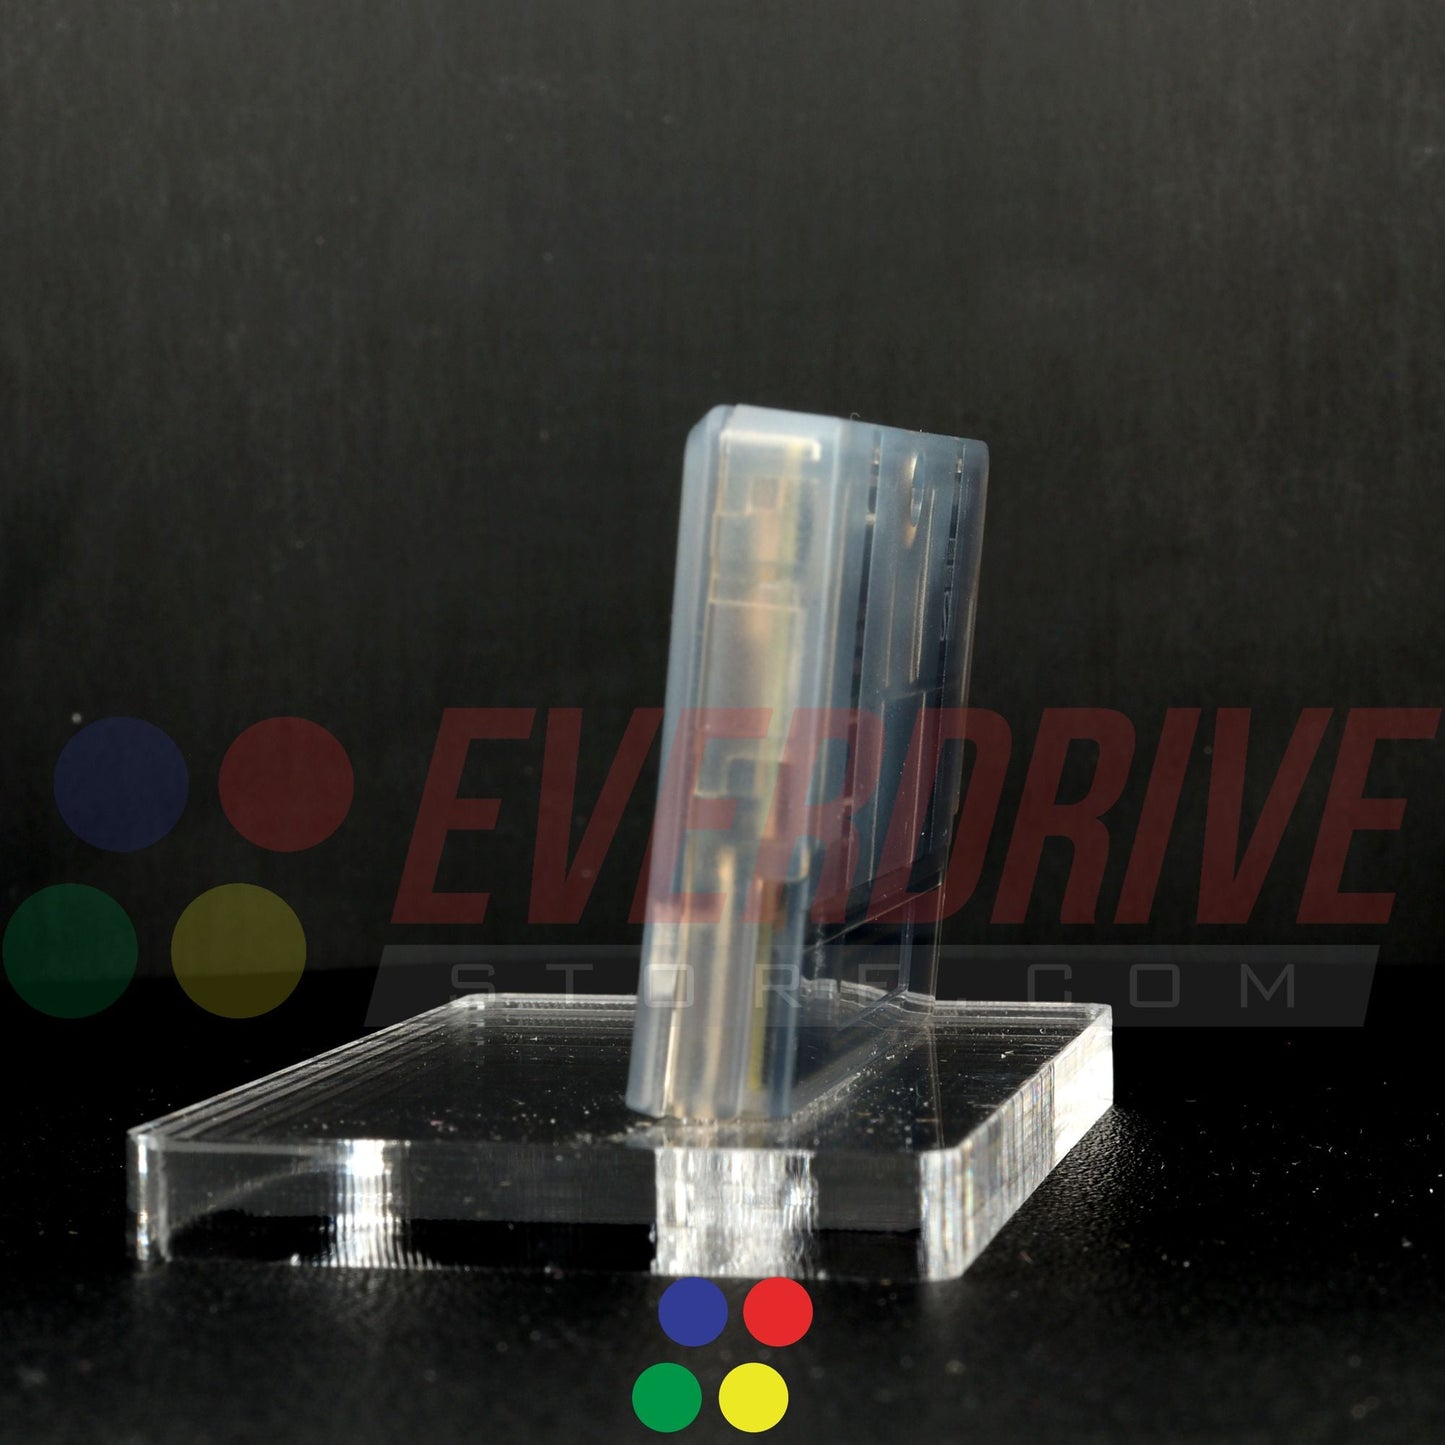 Everdrive GBA Mini - Frosted Black